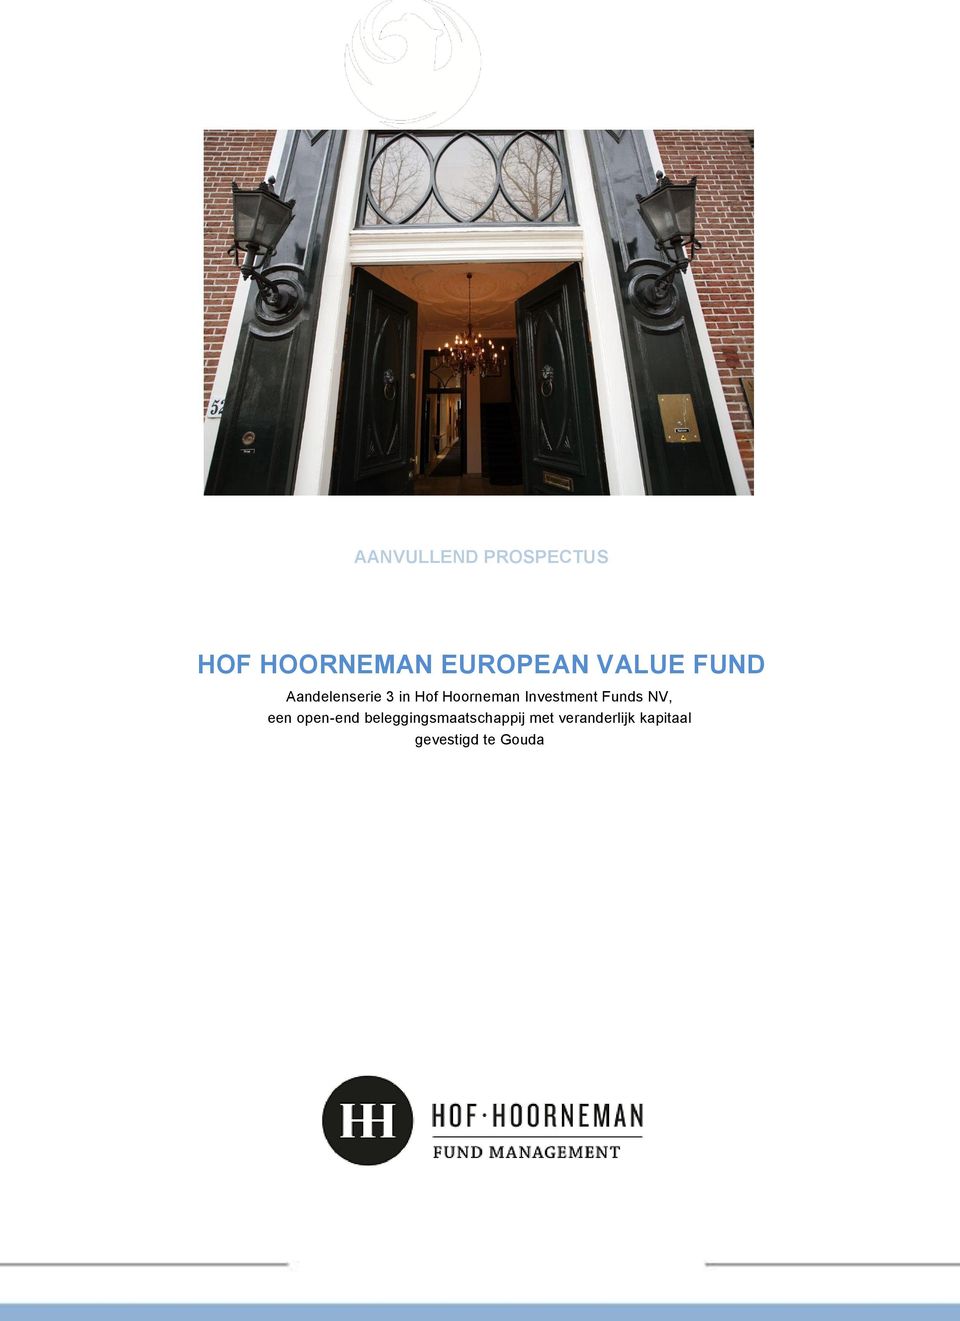 Investment Funds NV, een open-end